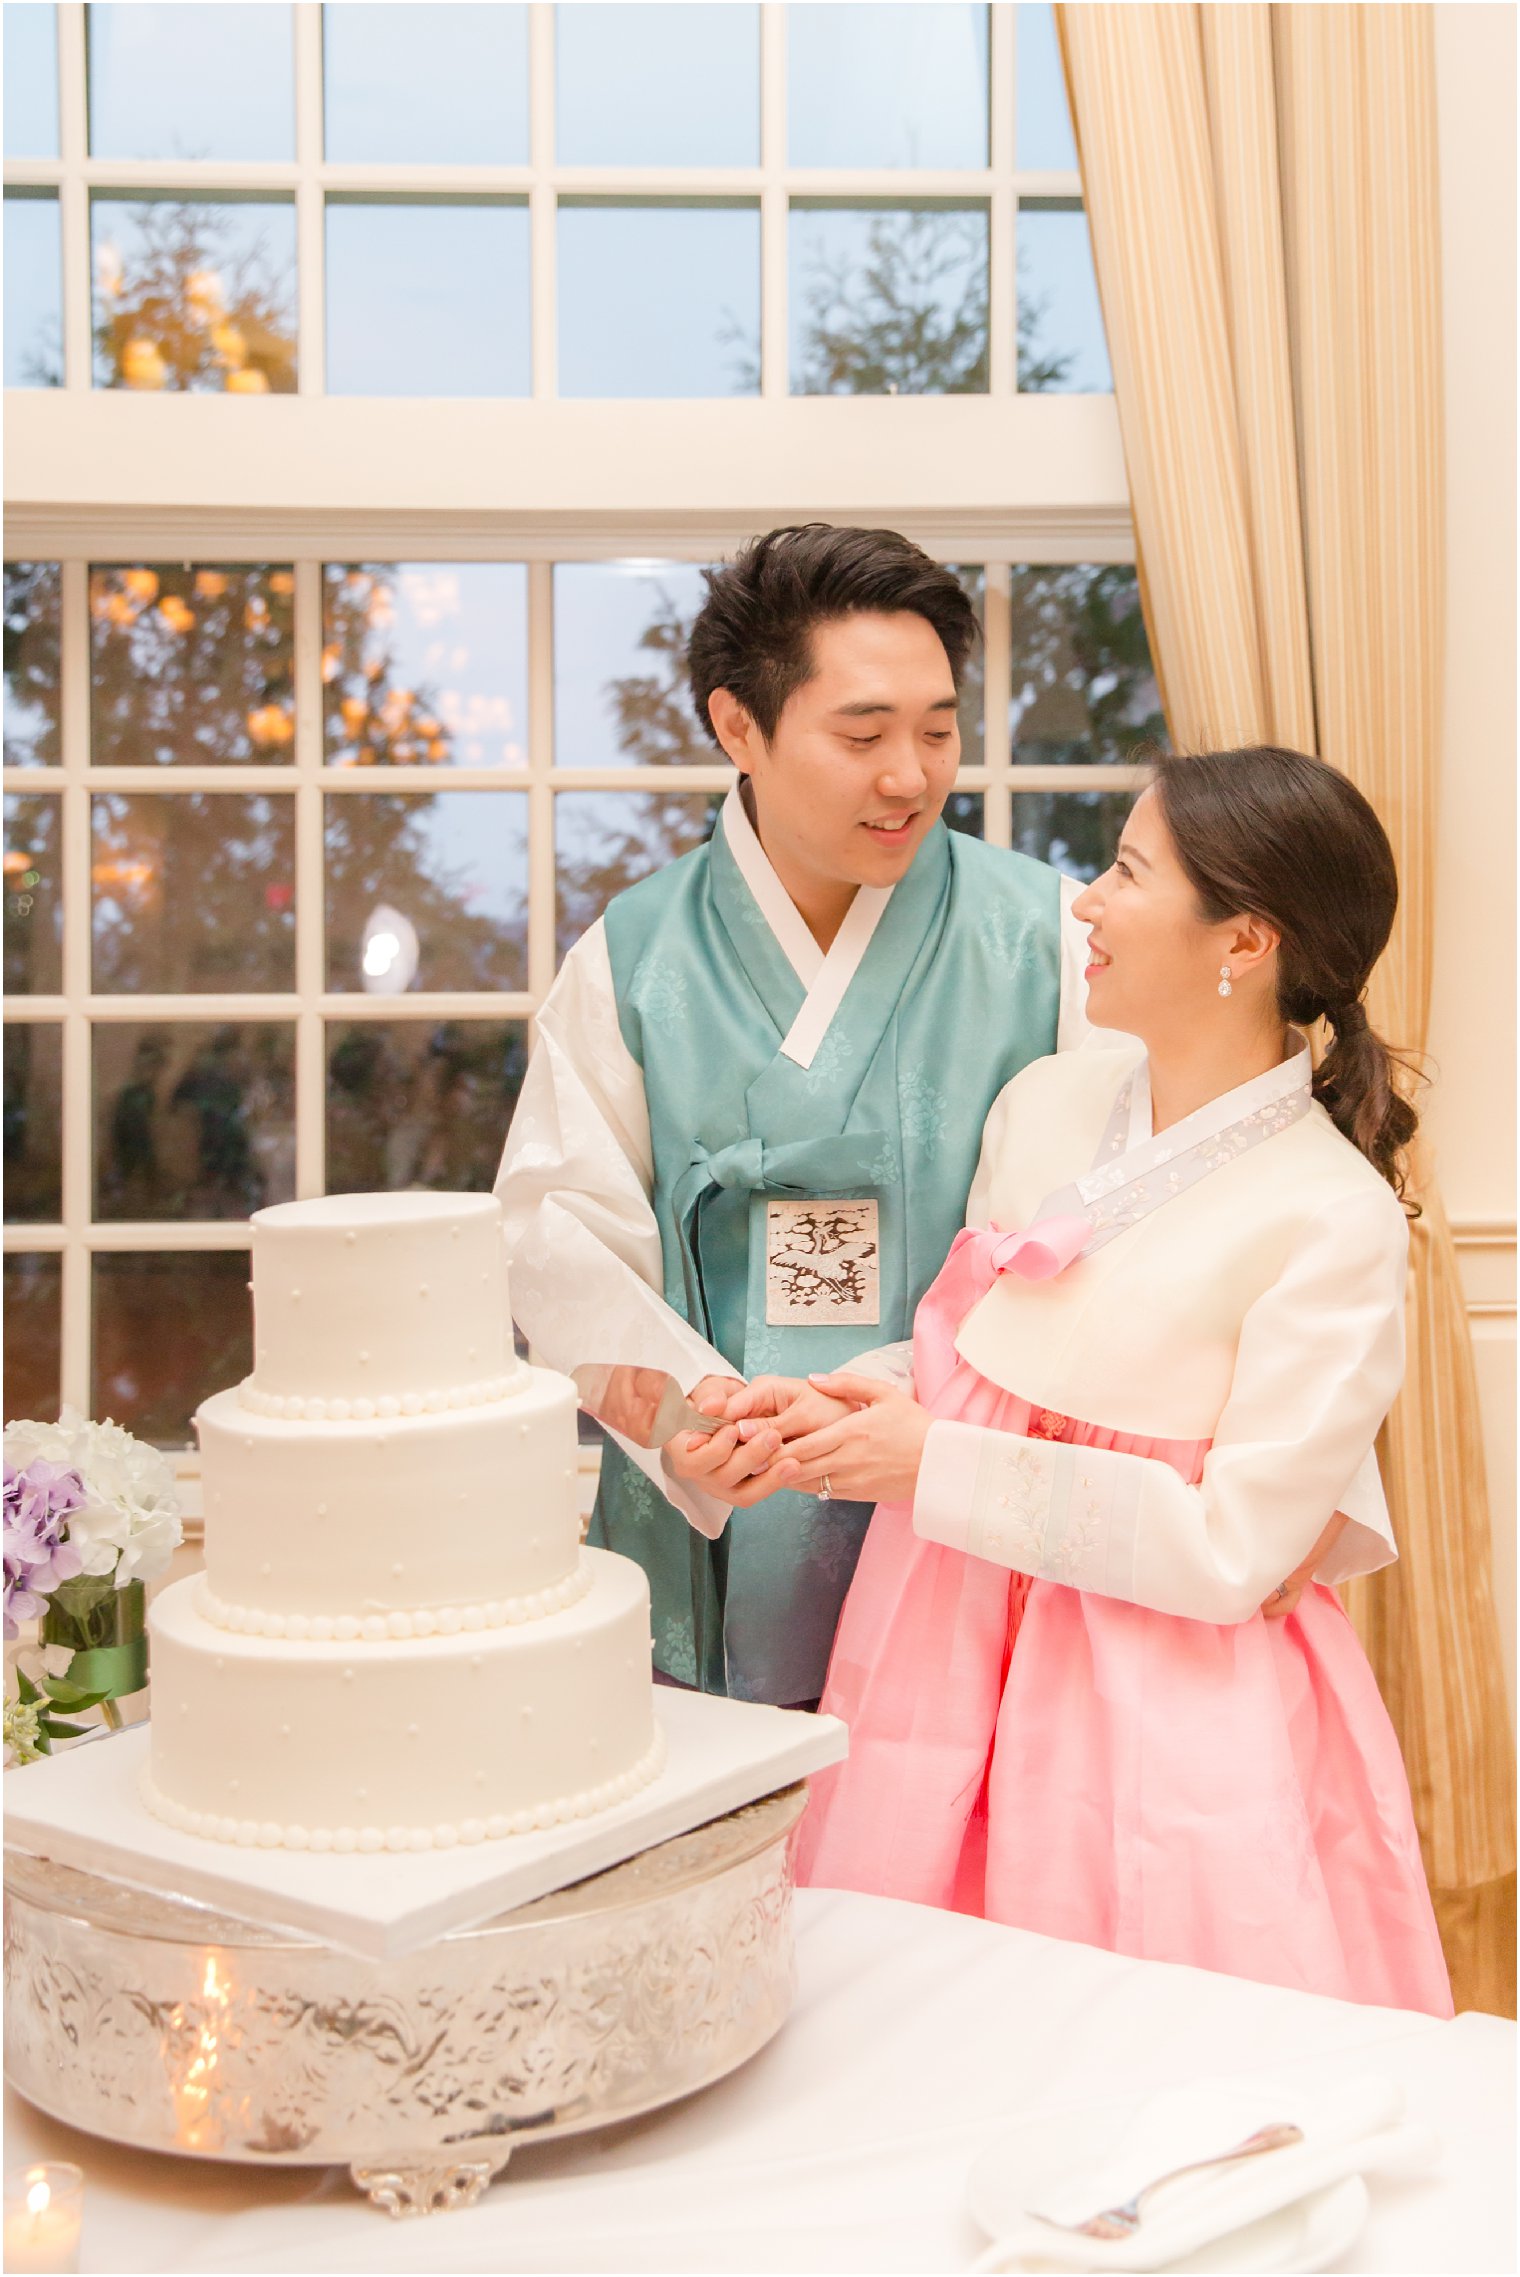 married couple wearing traditional Korean dress for wedding day